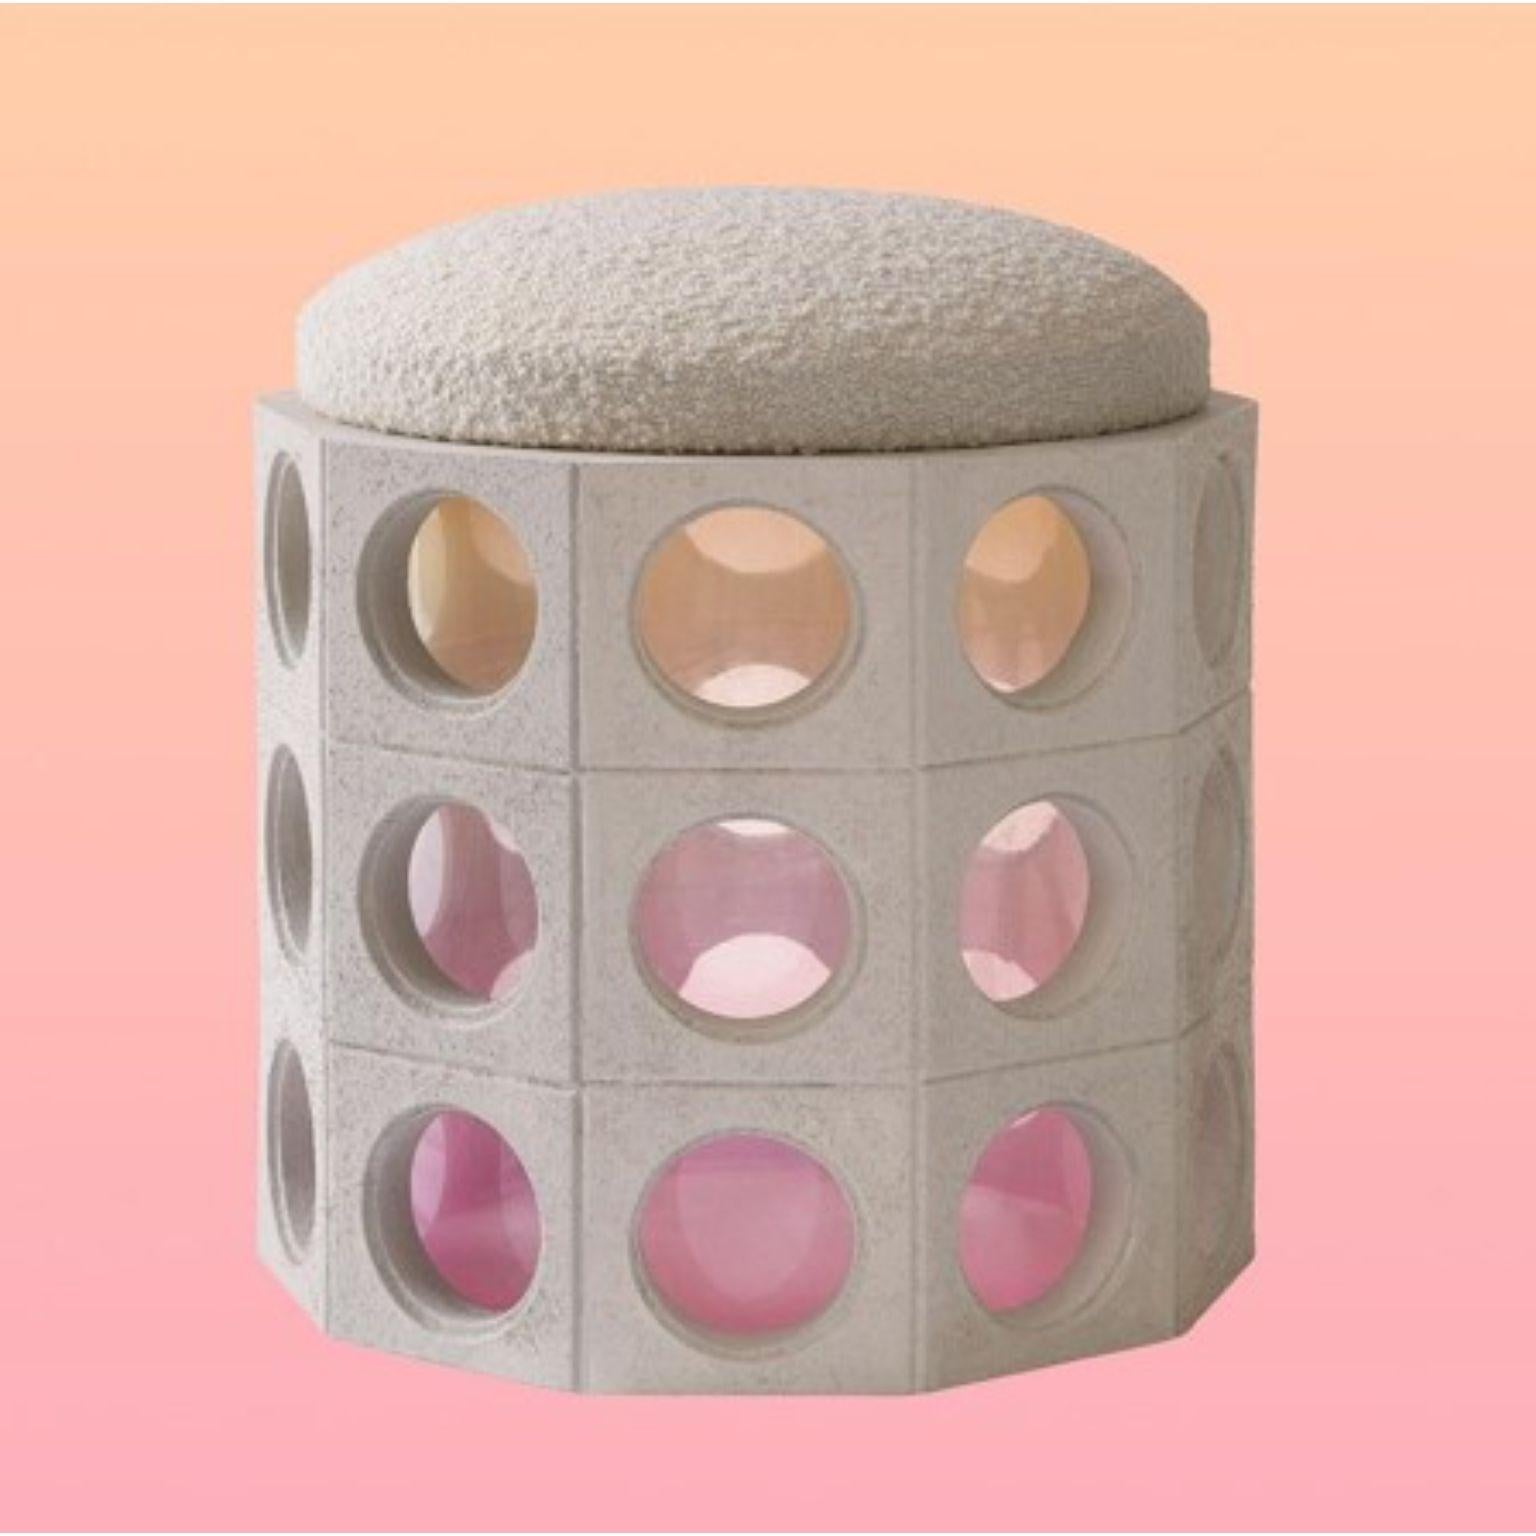 Elemento Pouf fire by Houtique
Materials: upholstery, fabric
Dimensions: D 40 x W 40 x H 46 cm

Designed by Patricia Bustos.
Made in Spain.
Resin structure.
Painted methactylate gradient interior.
(3 color options).

A pouf inspired by the